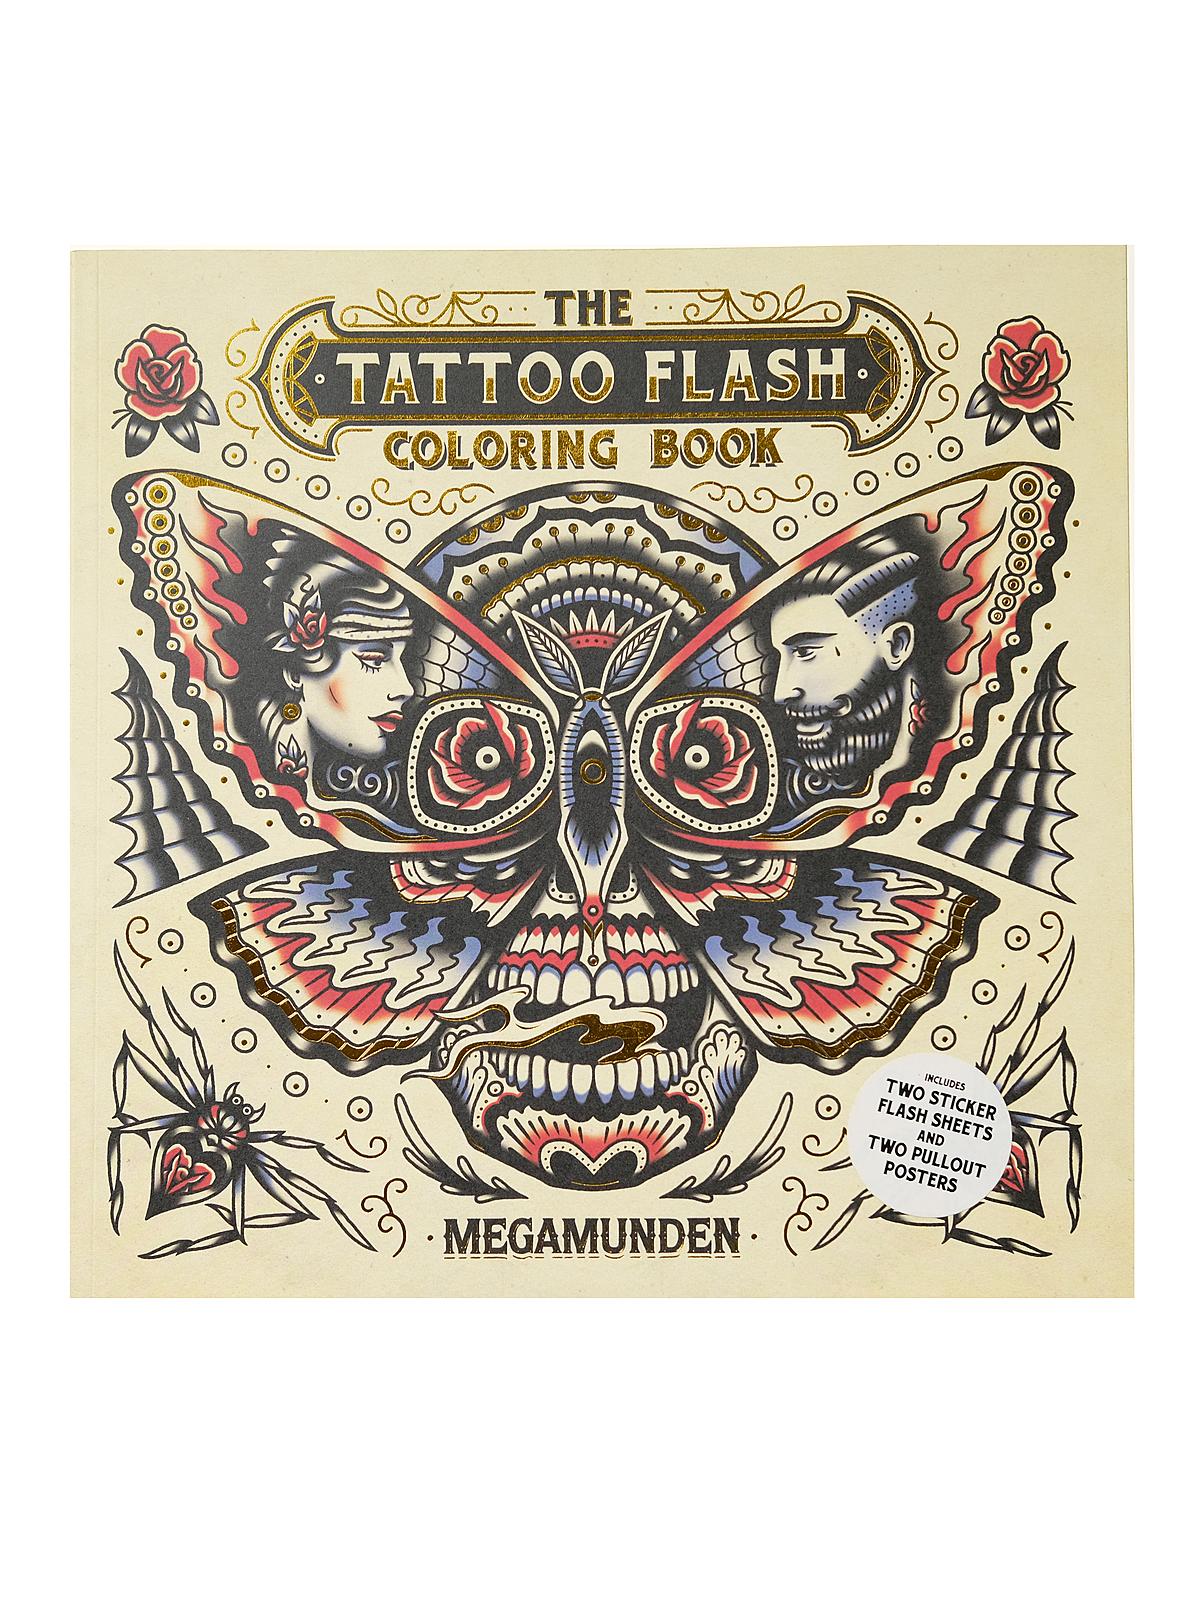 The Tattoo Flash Coloring Book Each